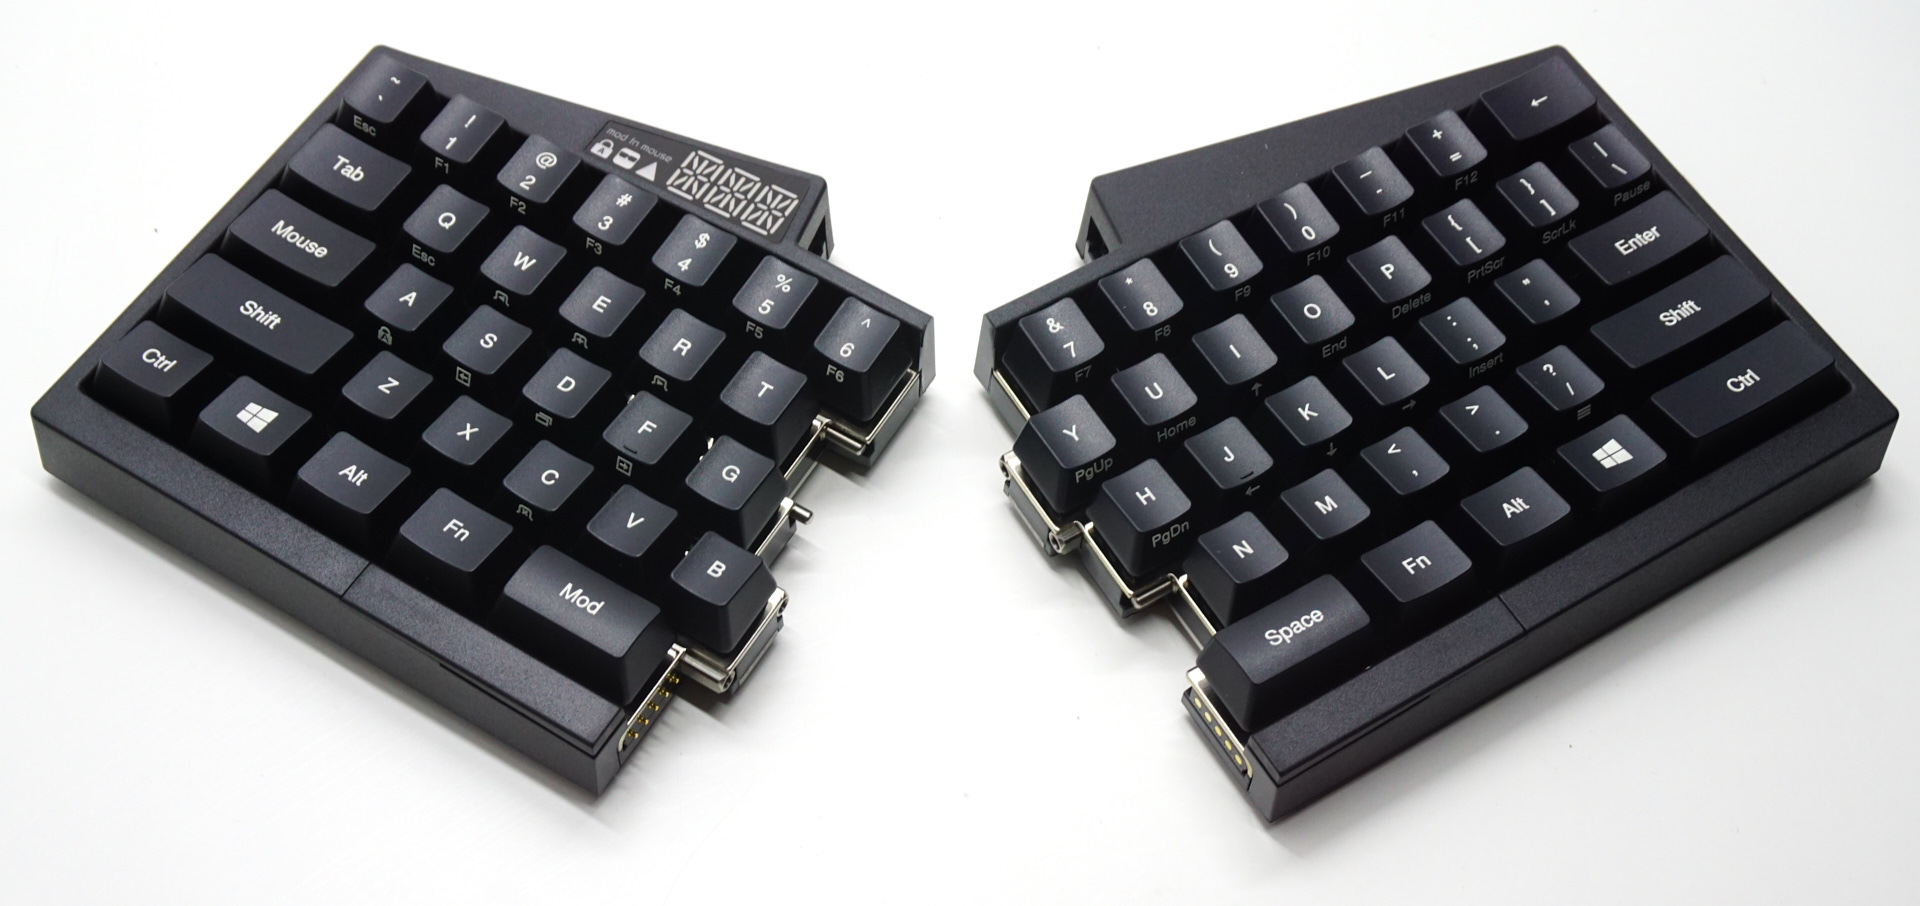 The Ultimate Hacking Keyboard Review: A Truly Unique, Truly